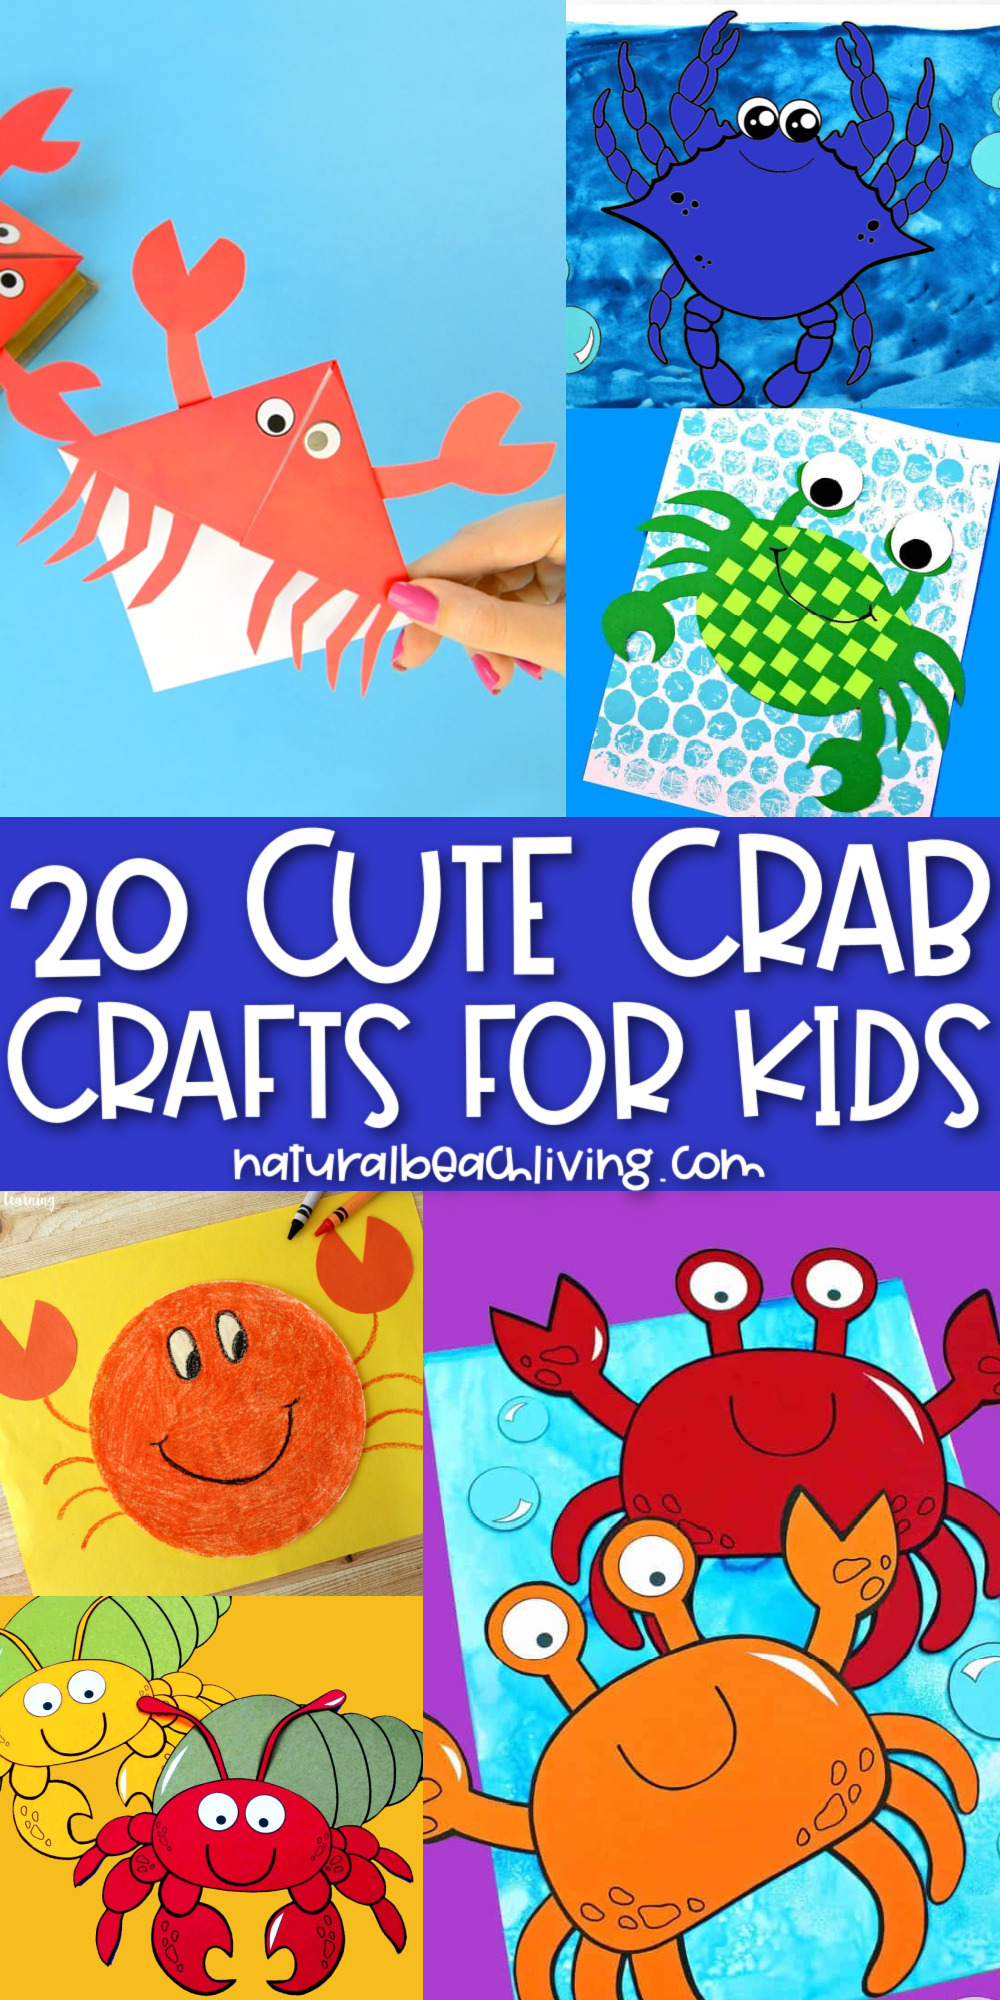 From cupcake liner crabs to paper plate crabs, paper crab crafts for preschoolers and even crabs made out of seashells, there's something to do all summer long. Get started on one of these fun crab preschool crafts today